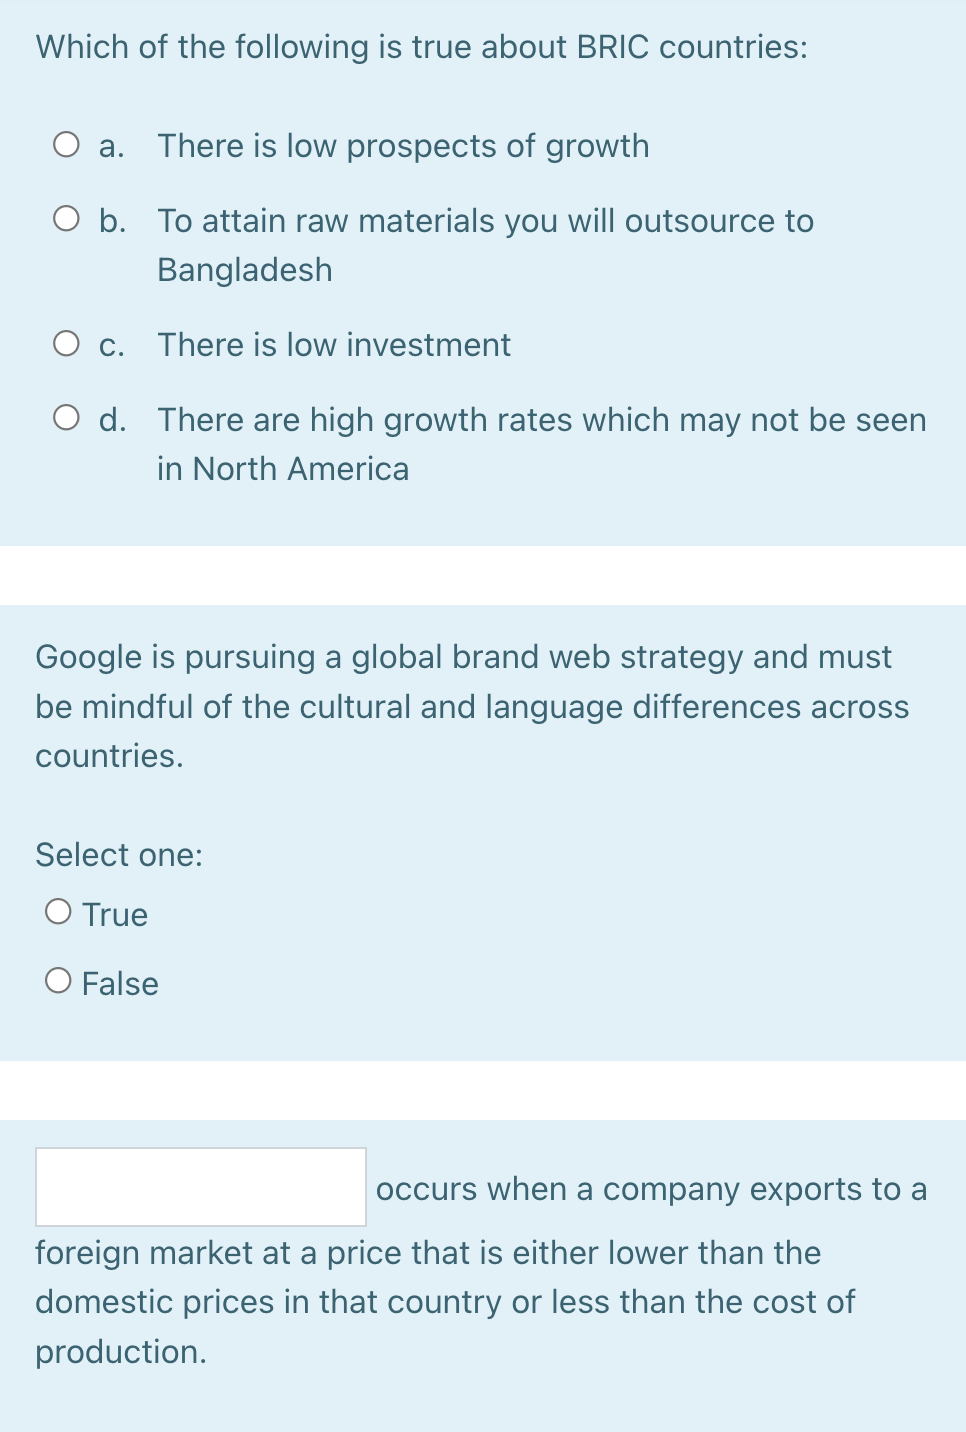 Which of the following is true about BRIC countries:
a. There is low prospects of growth
O b. To attain raw materials you will outsource to
Bangladesh
O c. There is low investment
O d. There are high growth rates which may not be seen
in North America
Google is pursuing a global brand web strategy and must
be mindful of the cultural and language differences across
countries.
Select one:
O True
O False
occurs when a company exports to a
foreign market at a price that is either lower than the
domestic prices in that country or less than the cost of
production.
